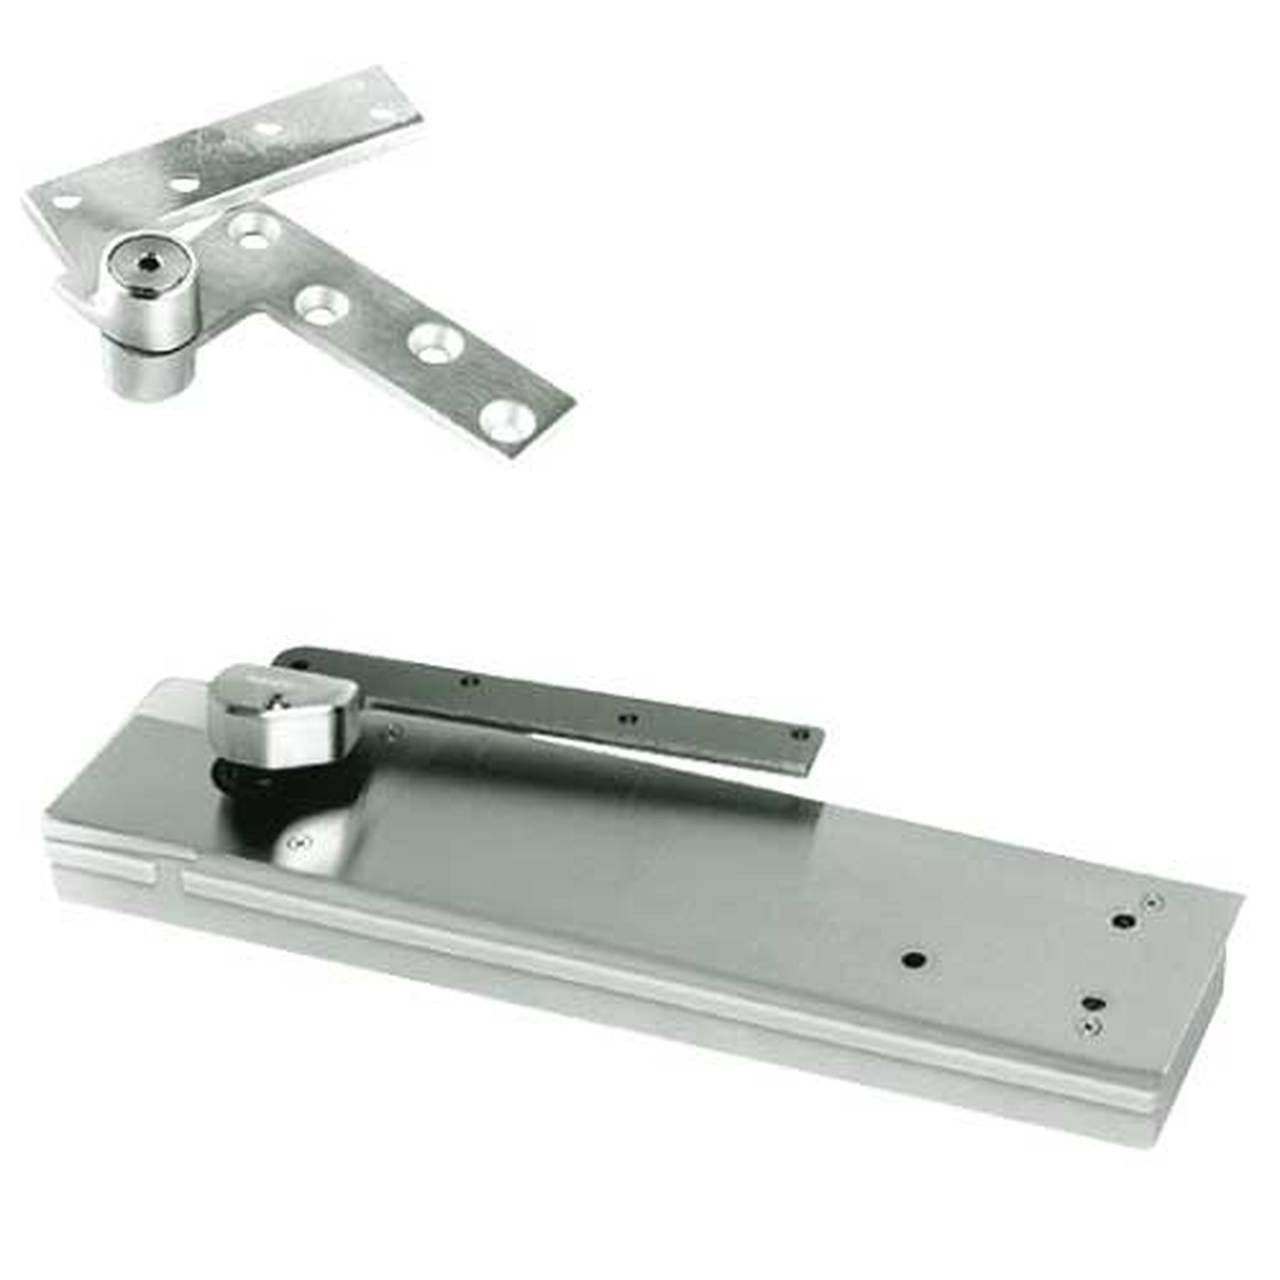 FHM5105NBC-LCC-RH-618 Rixson HM51 Series 3/4" Offset Hung Shallow Depth Floor Closers in Bright Nickel Finish